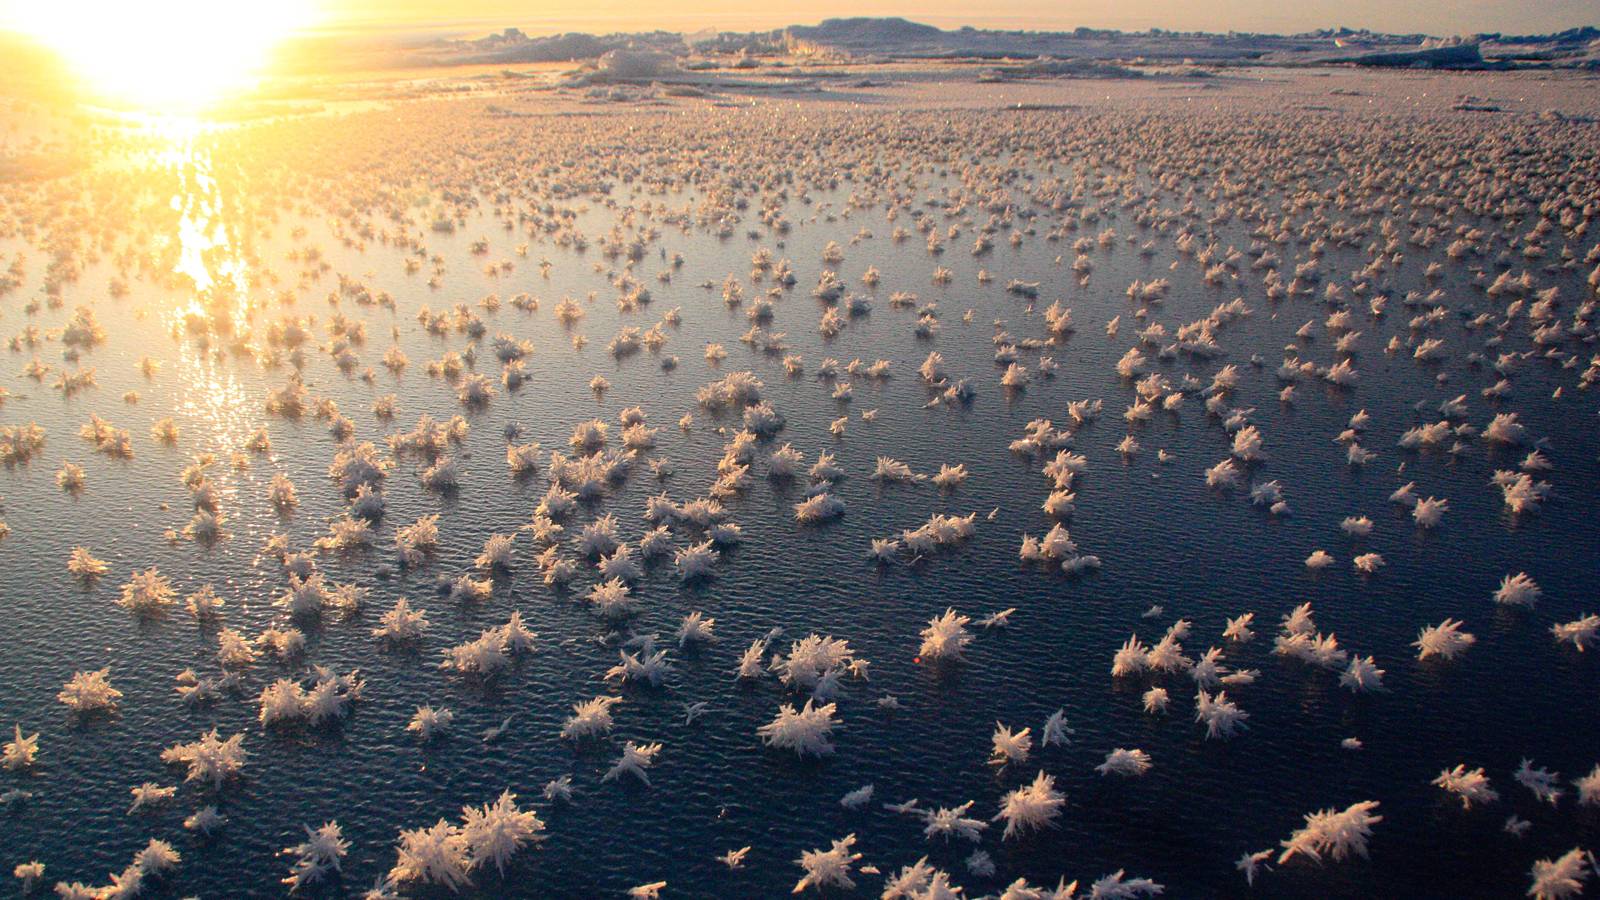 ICE CRYSTALS DEVELOP ON WATERS SURFACE